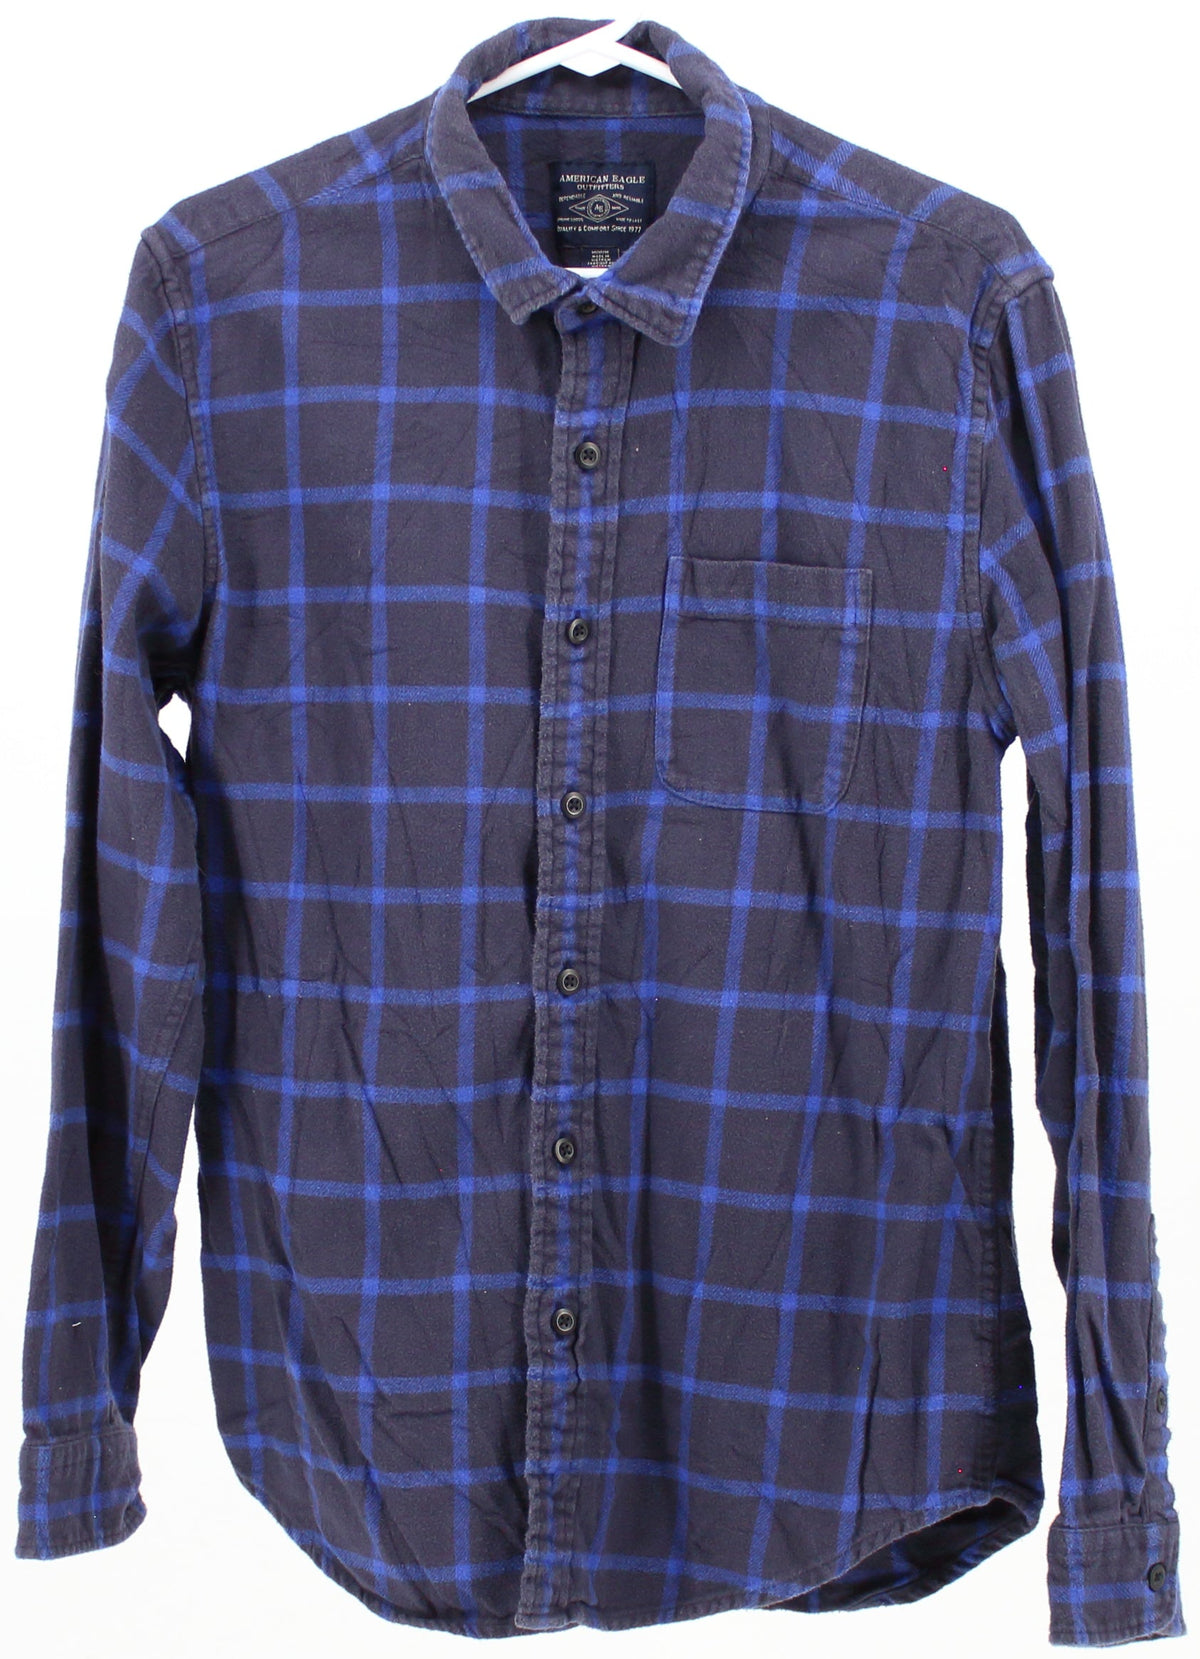 American Eagle Outfitters Black and Blue Plaid Flannel Shirt